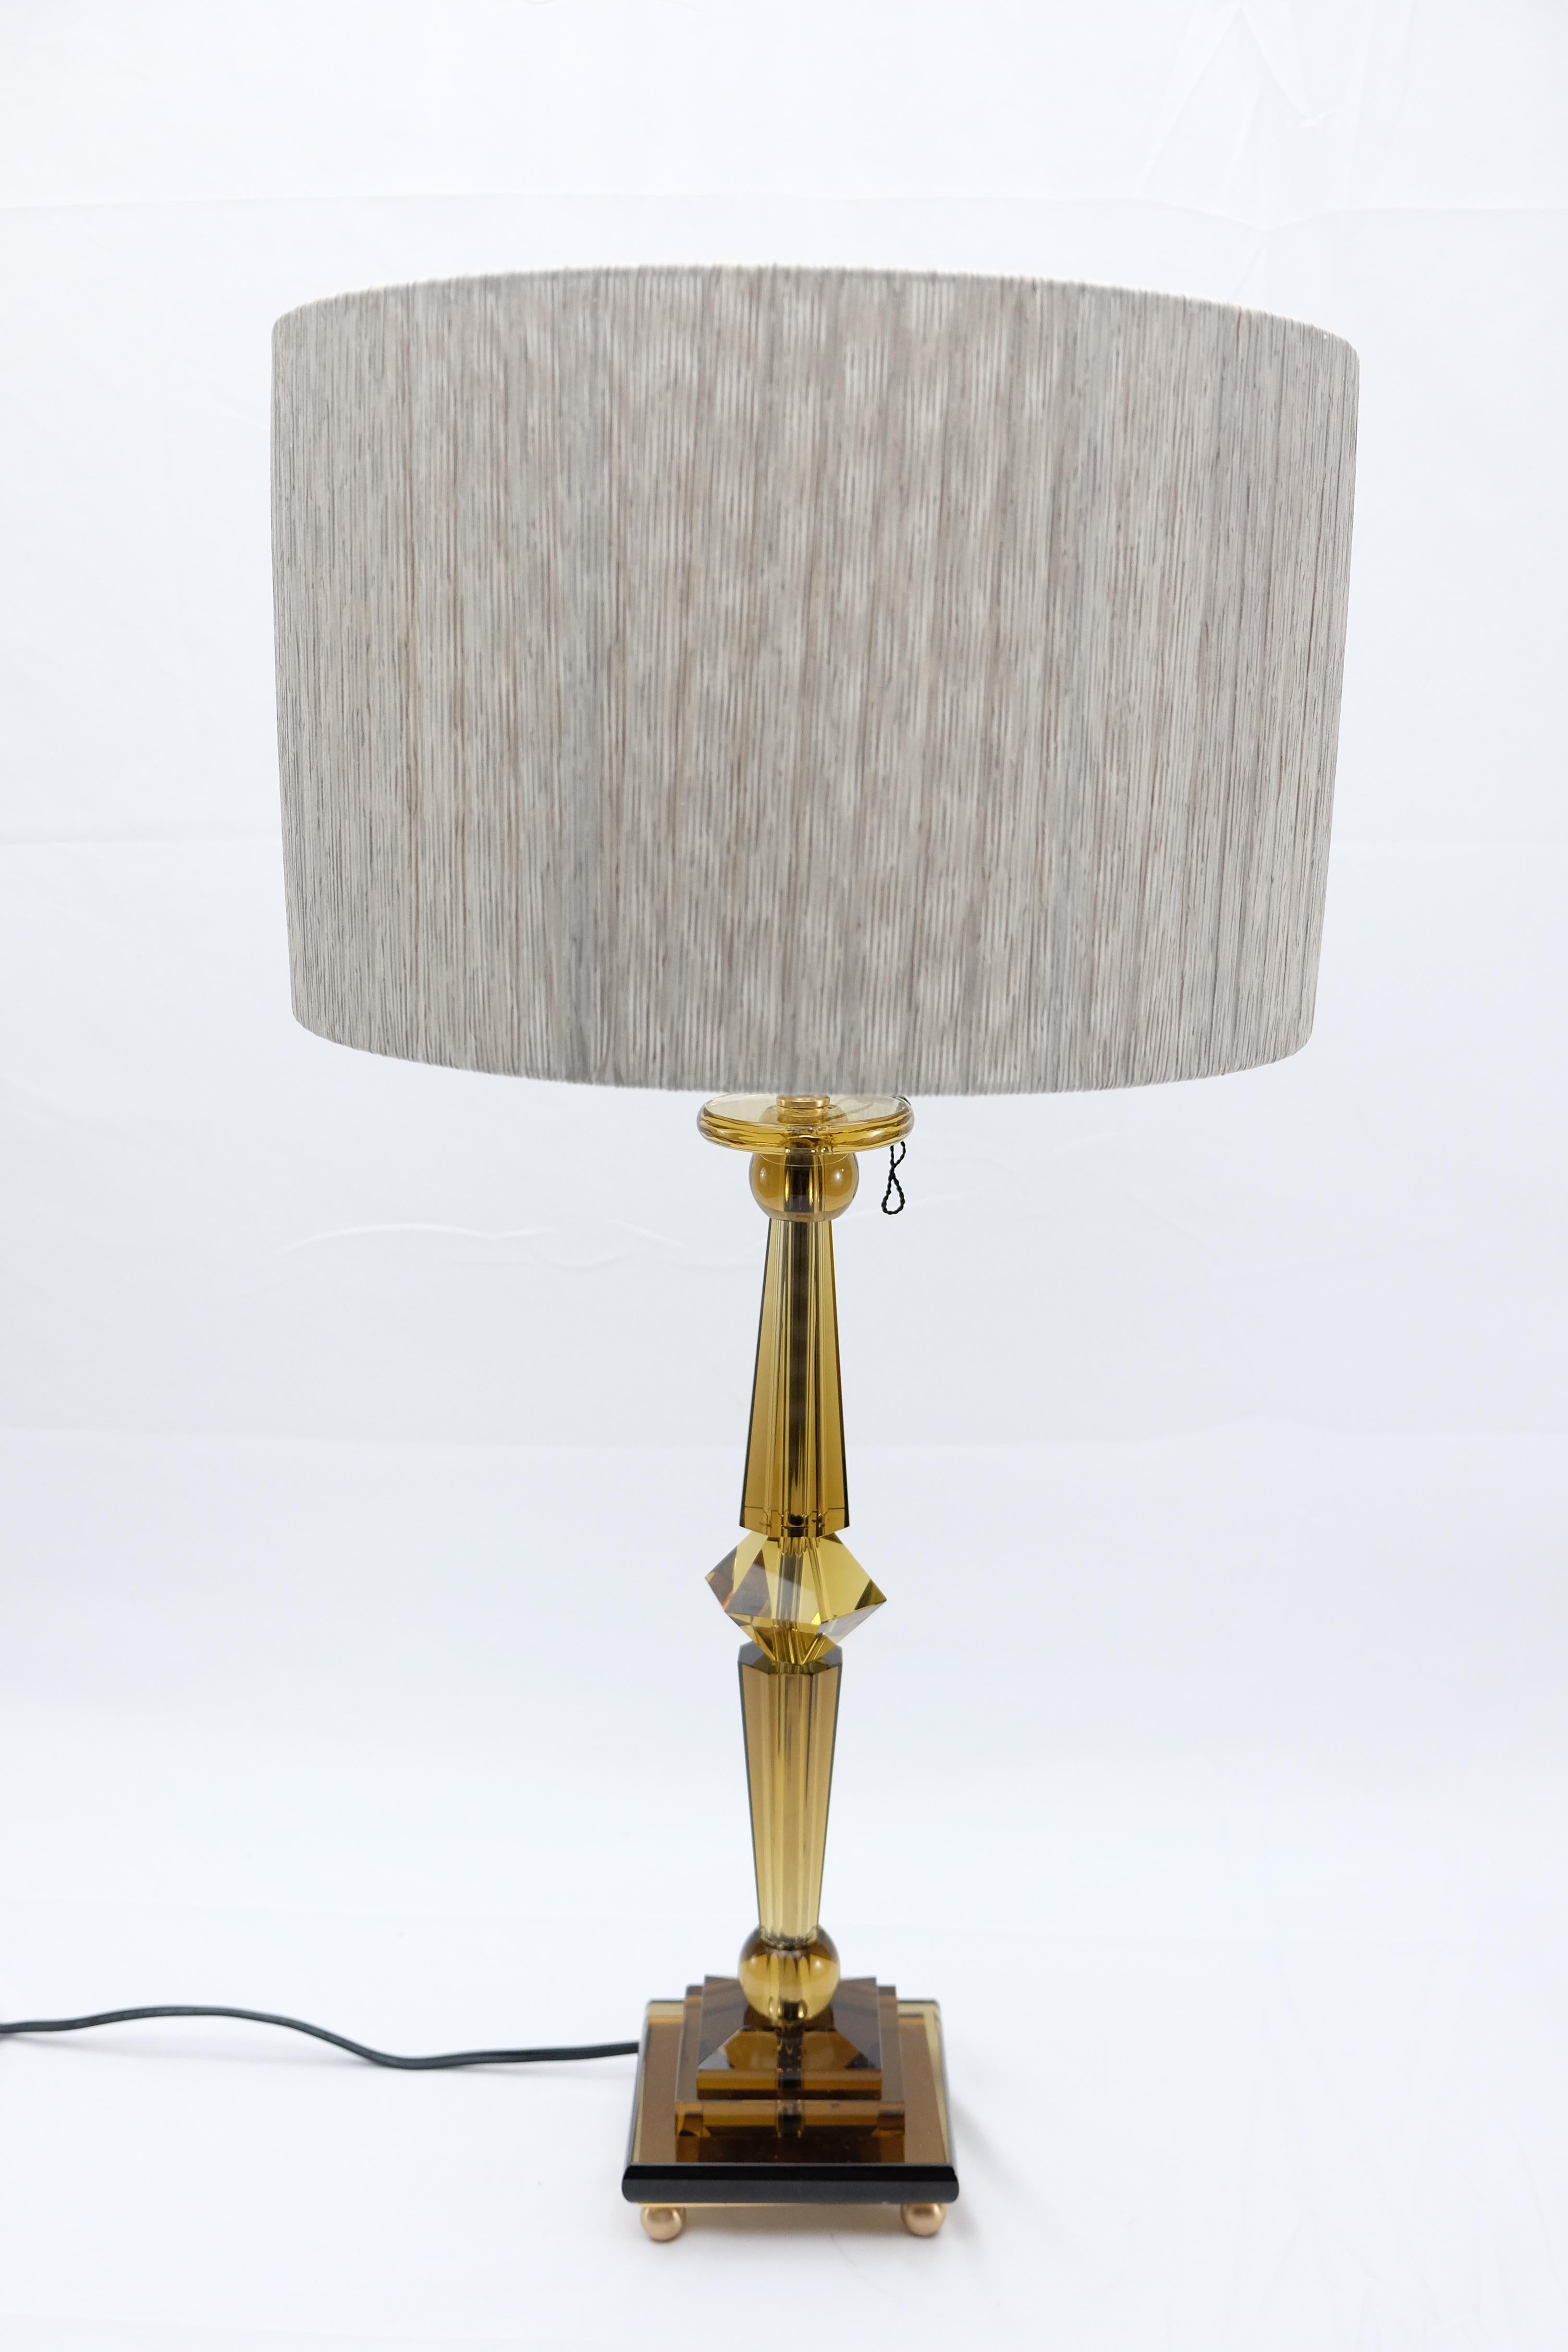 Crystal Attilio Amato for Laudarte Srl Prisma Big Table Lamp, Pair Available For Sale